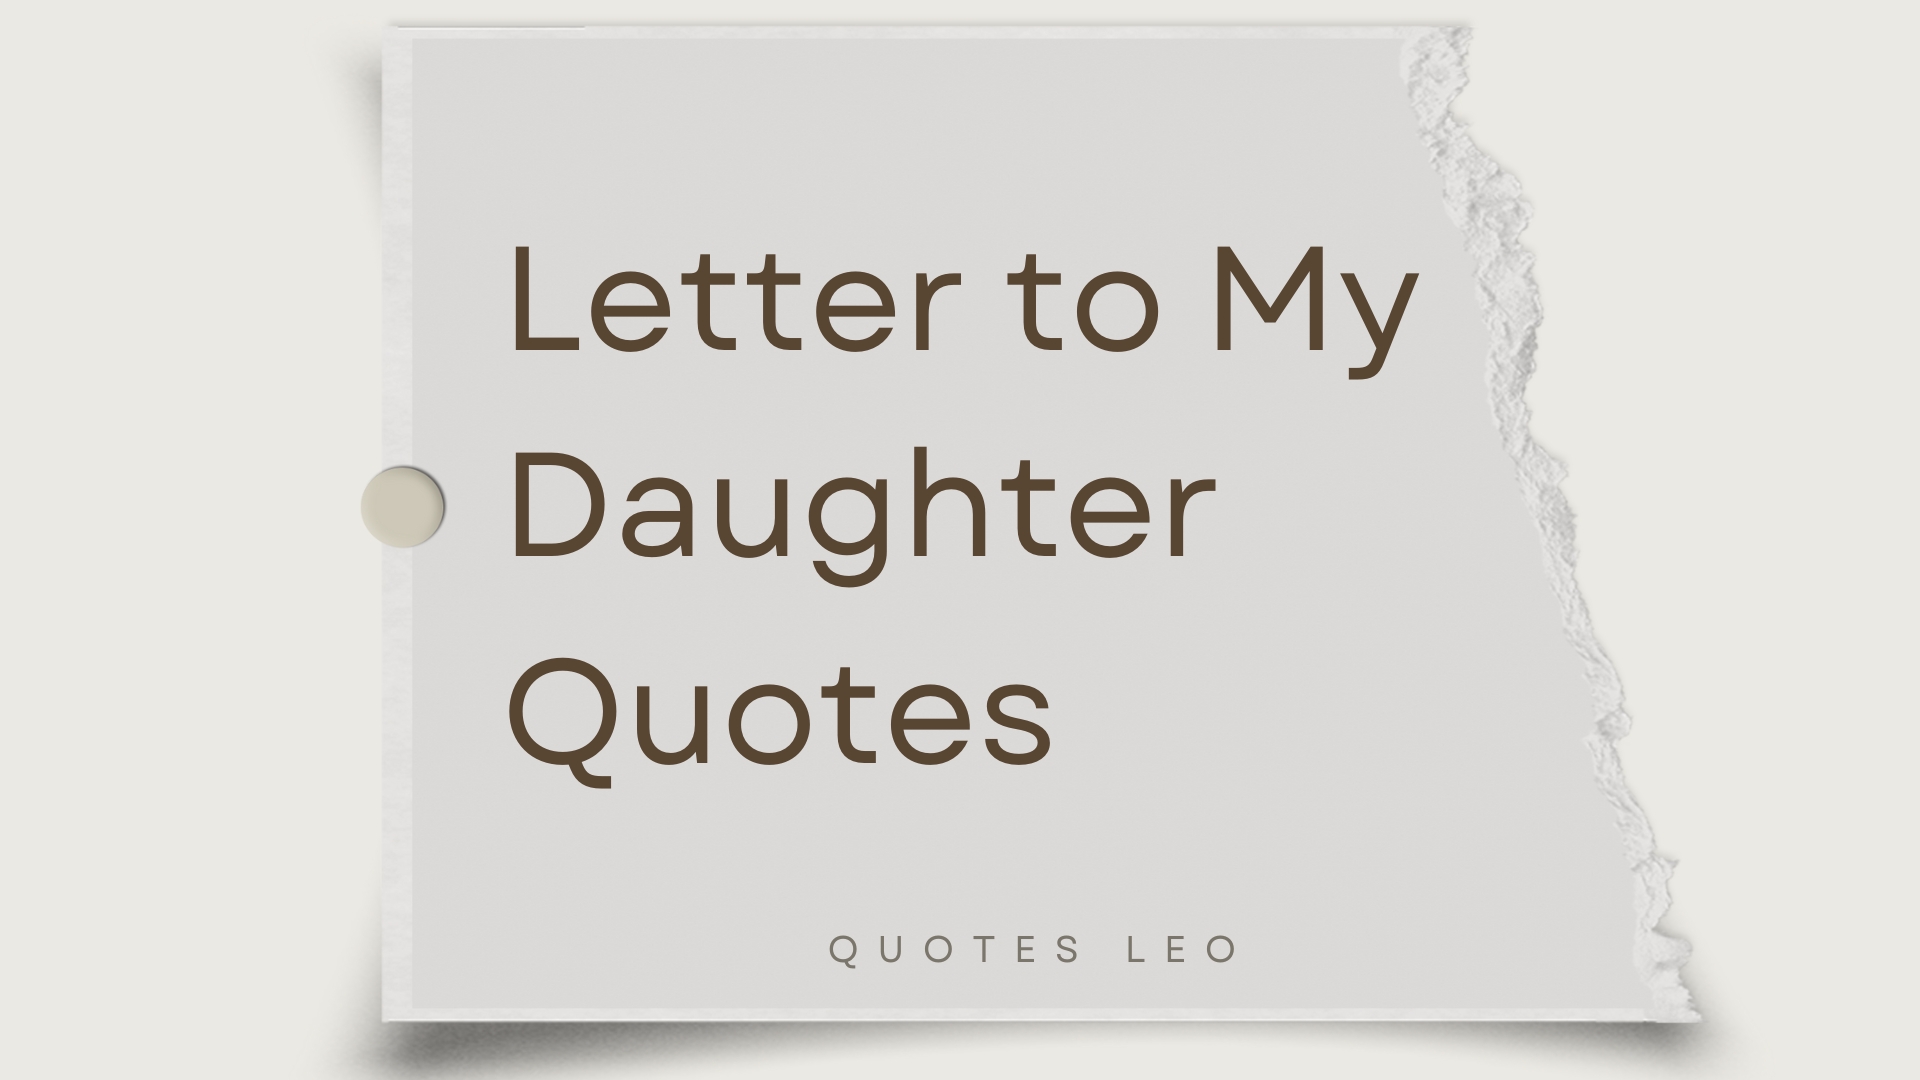 Letter to My Daughter Quotes for Life's Journey